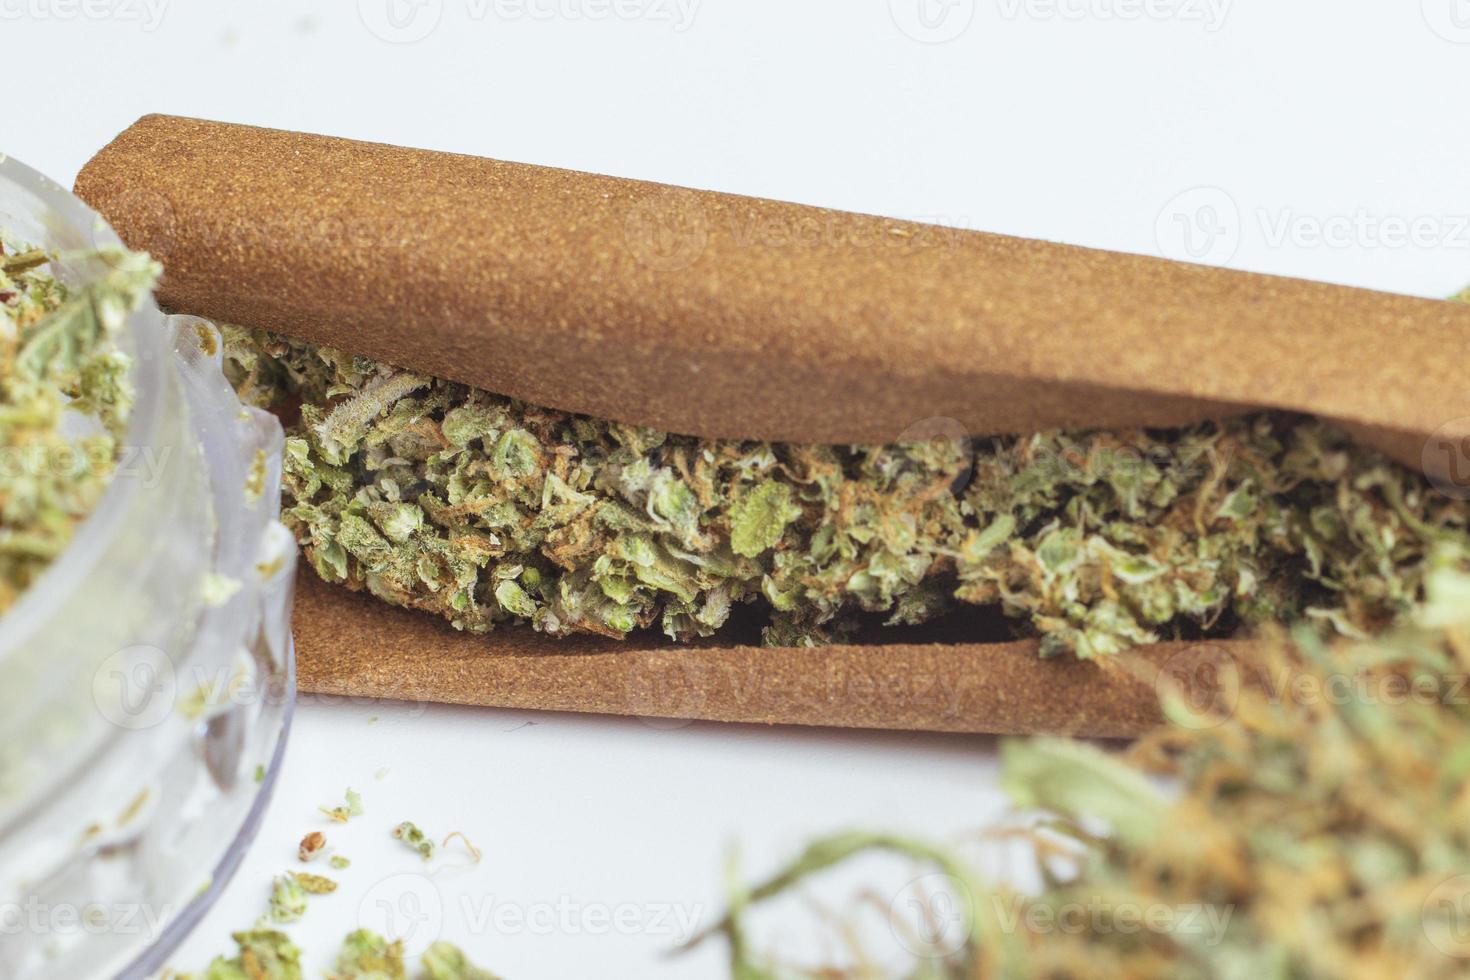 Crumbled medical cannabis buds in blunt paper close up. Smoking legal marijuana. Weed lifestyle photo